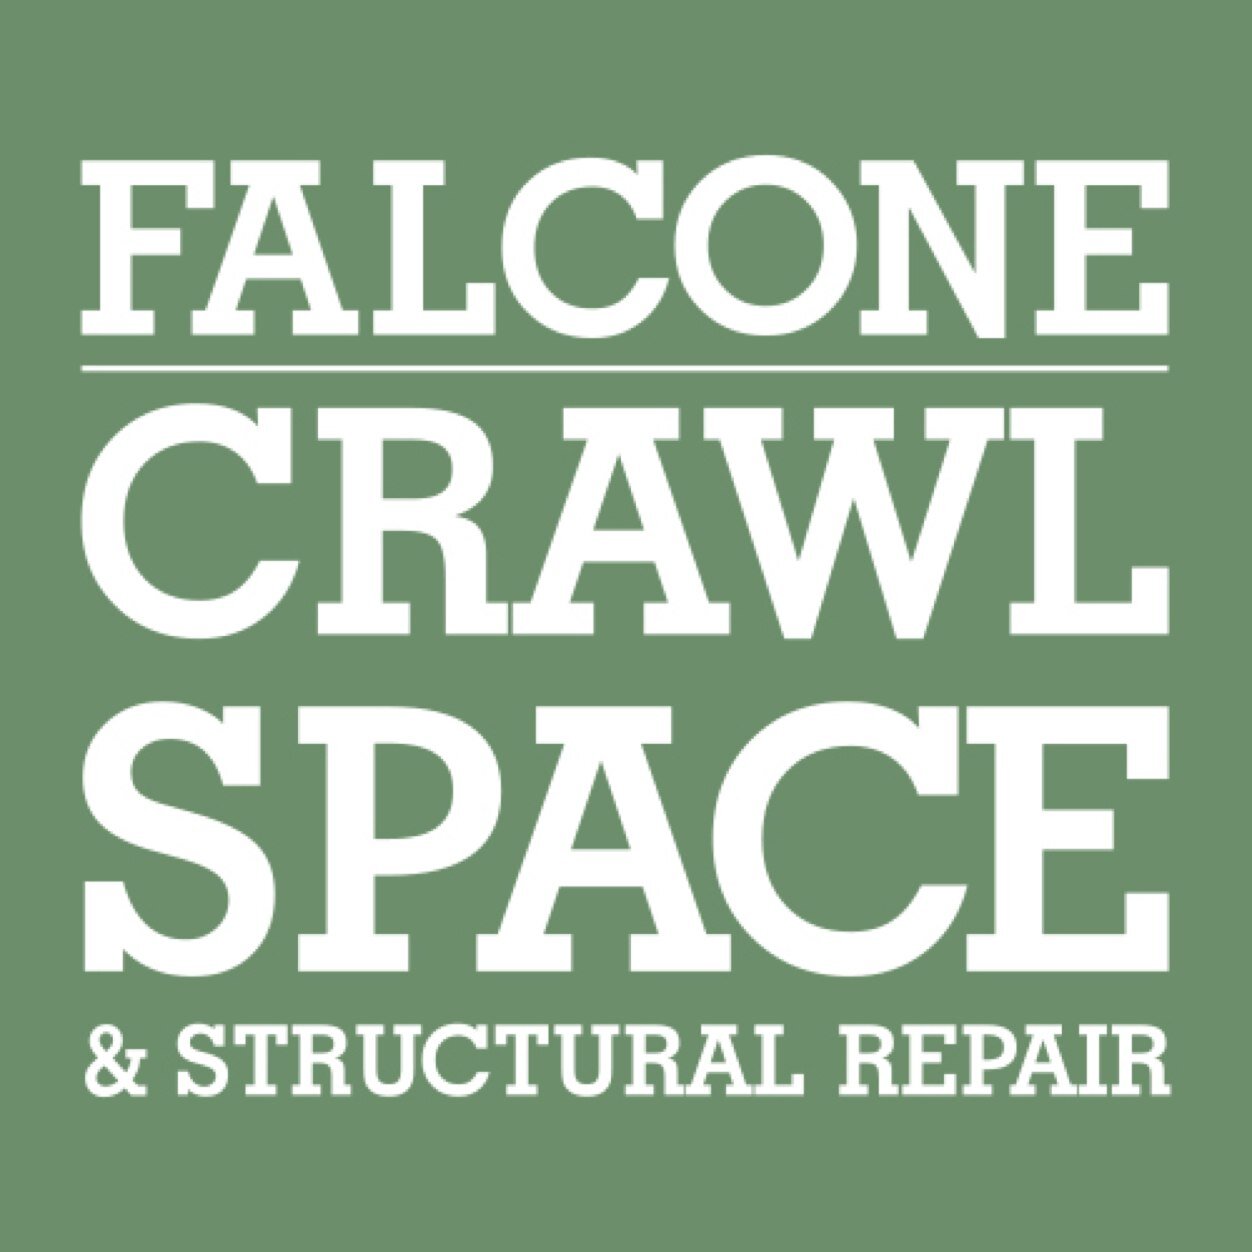 We are your friends in crawl spaces. Carolinians trust Falcone for foundation repairs, waterproofing and drainage solutions. 866-651-8989